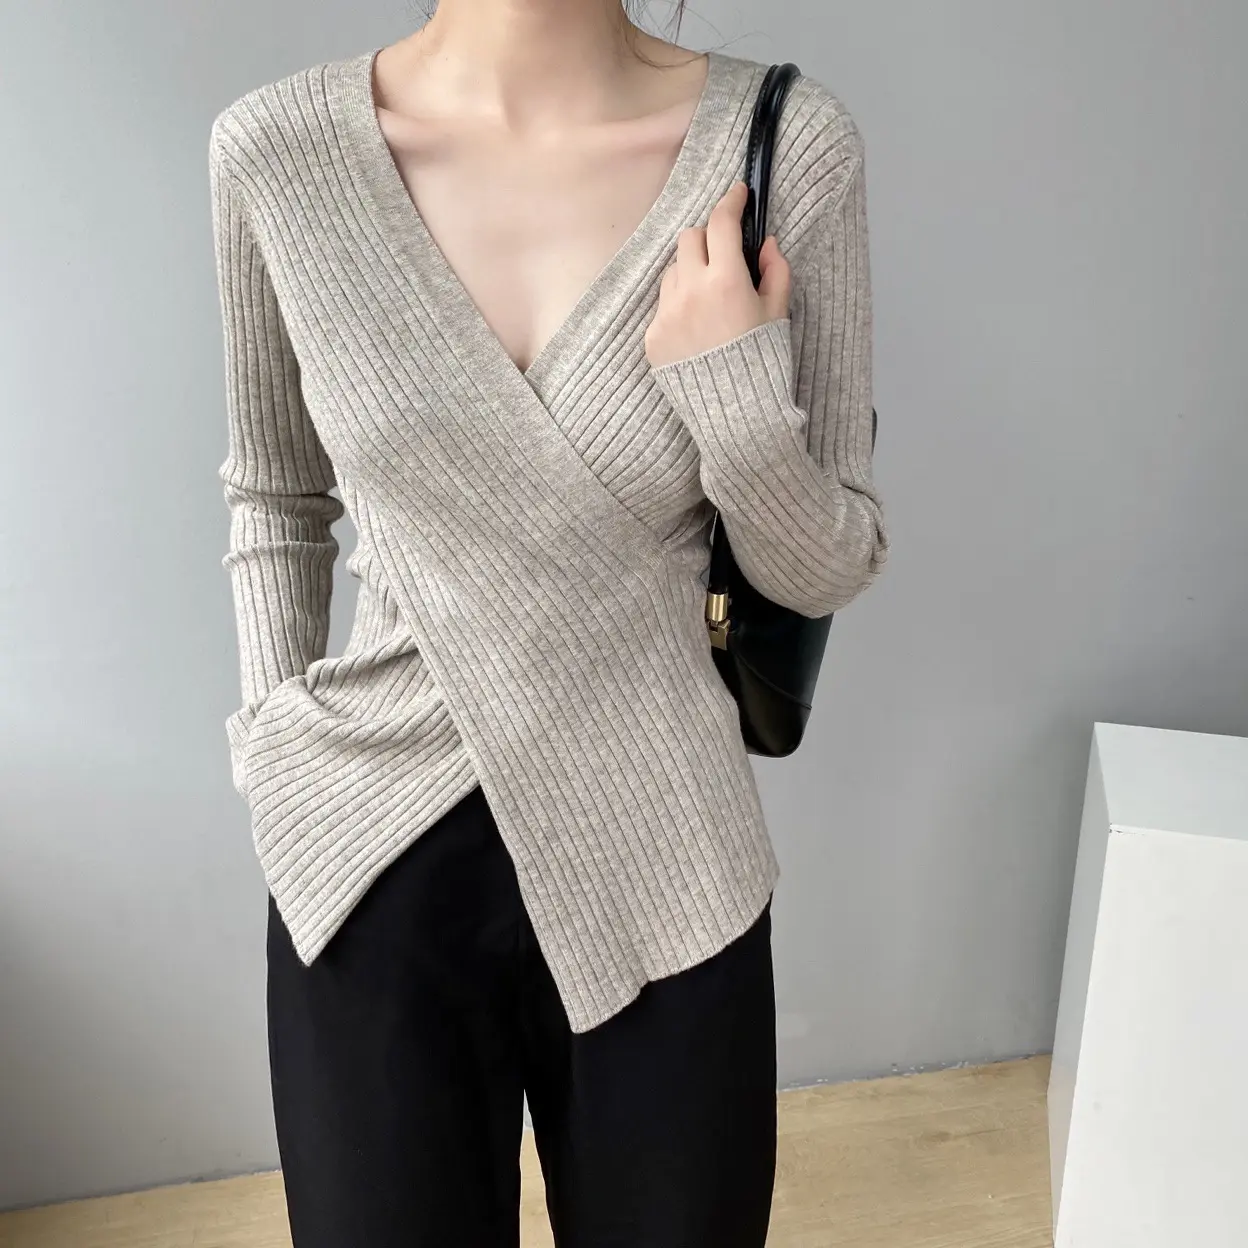 V-neck cross long sleeved sweater autumn and winter women's clothing Europe and America split sweater women